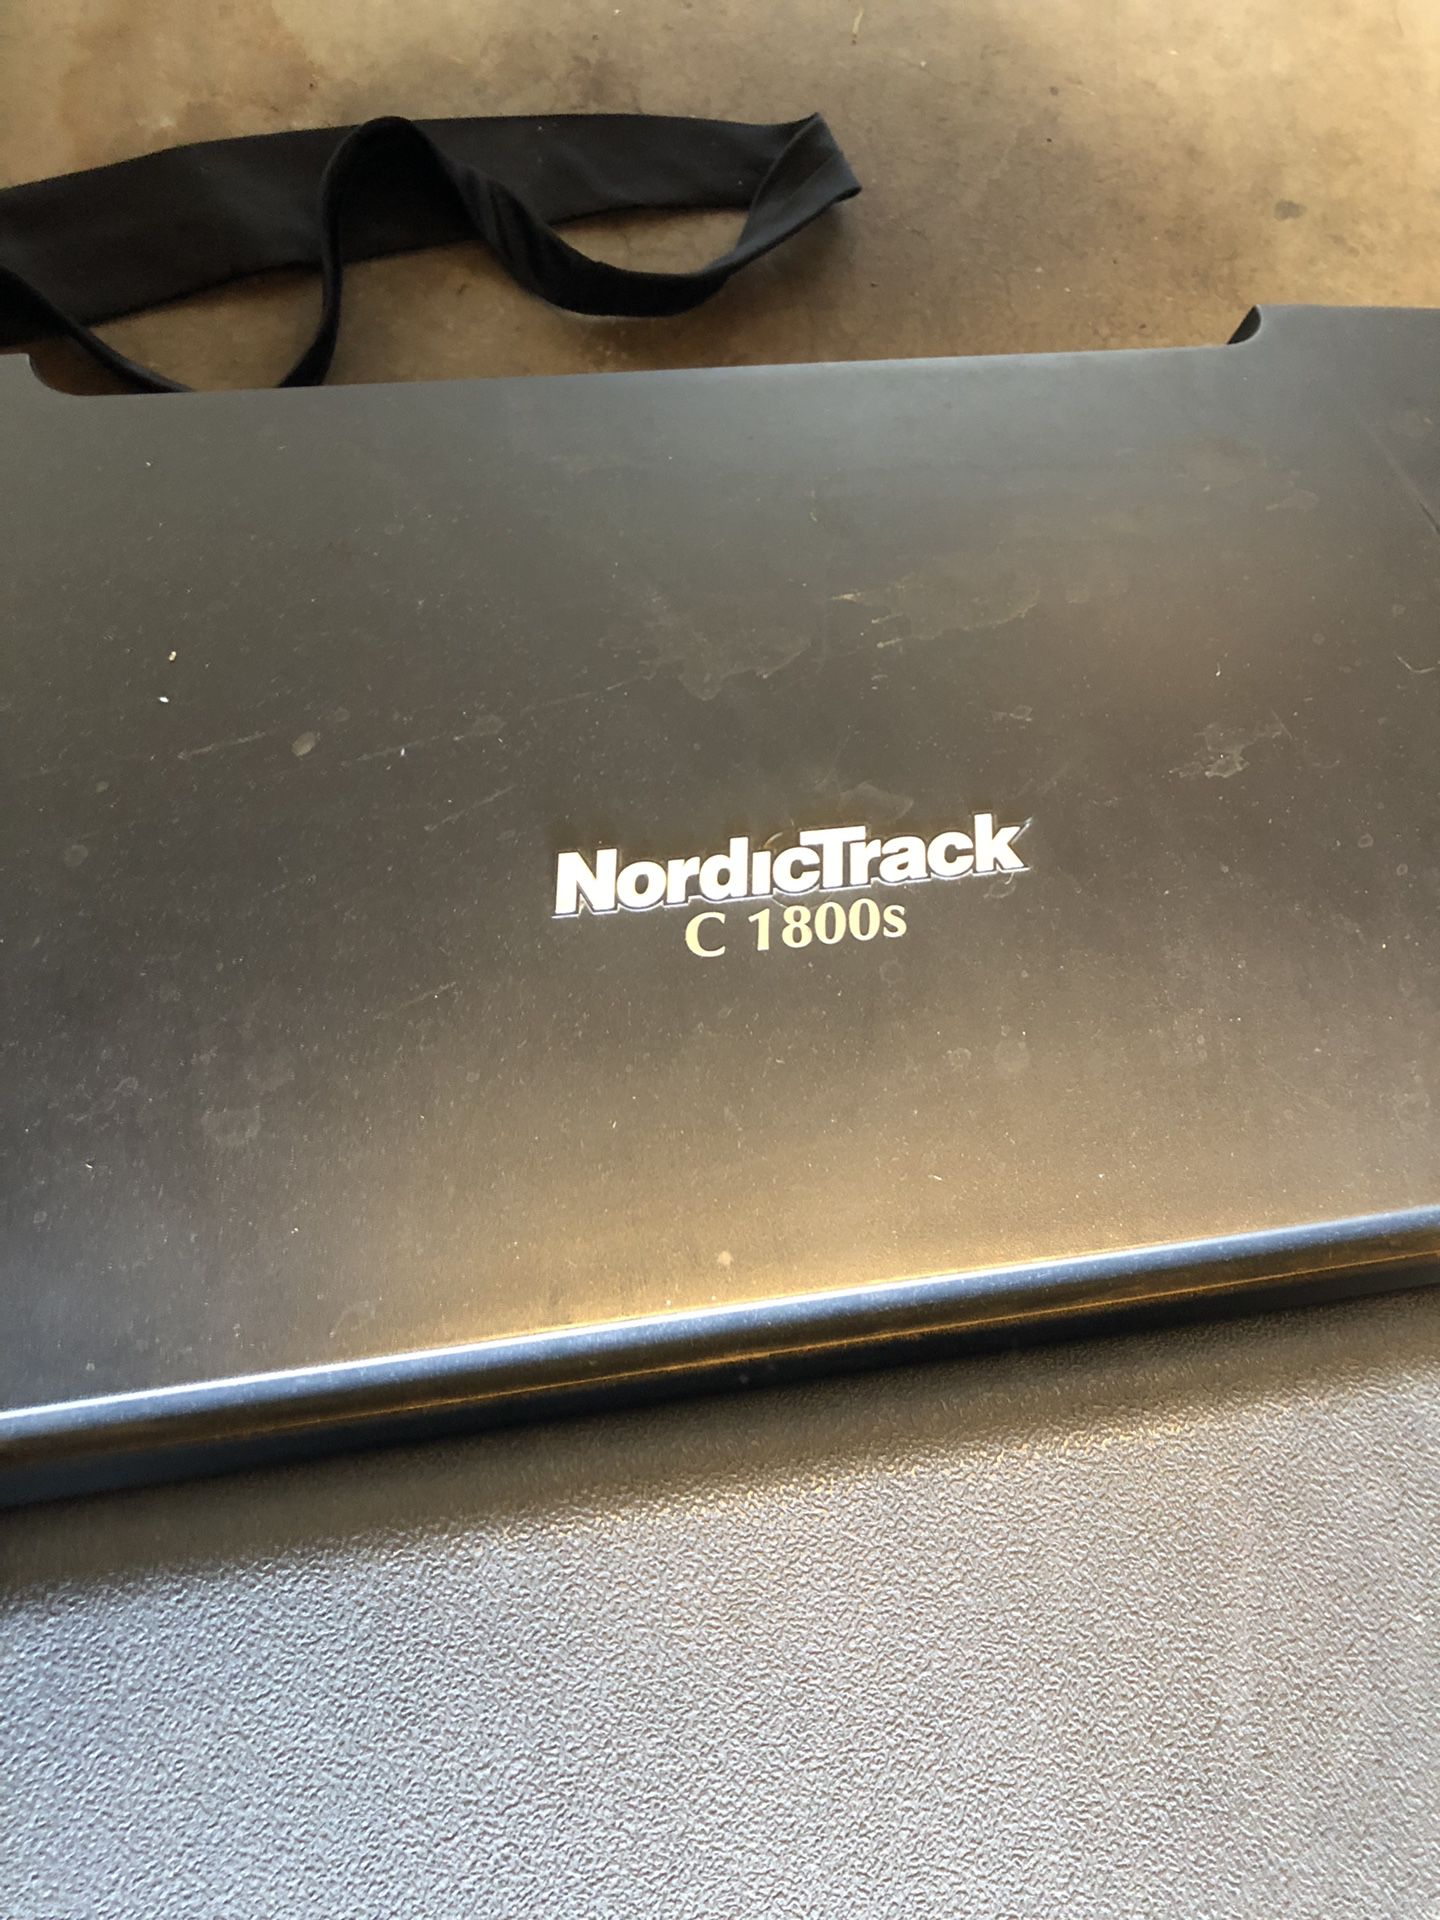 Nordic track treadmill barely used 400 or best offer